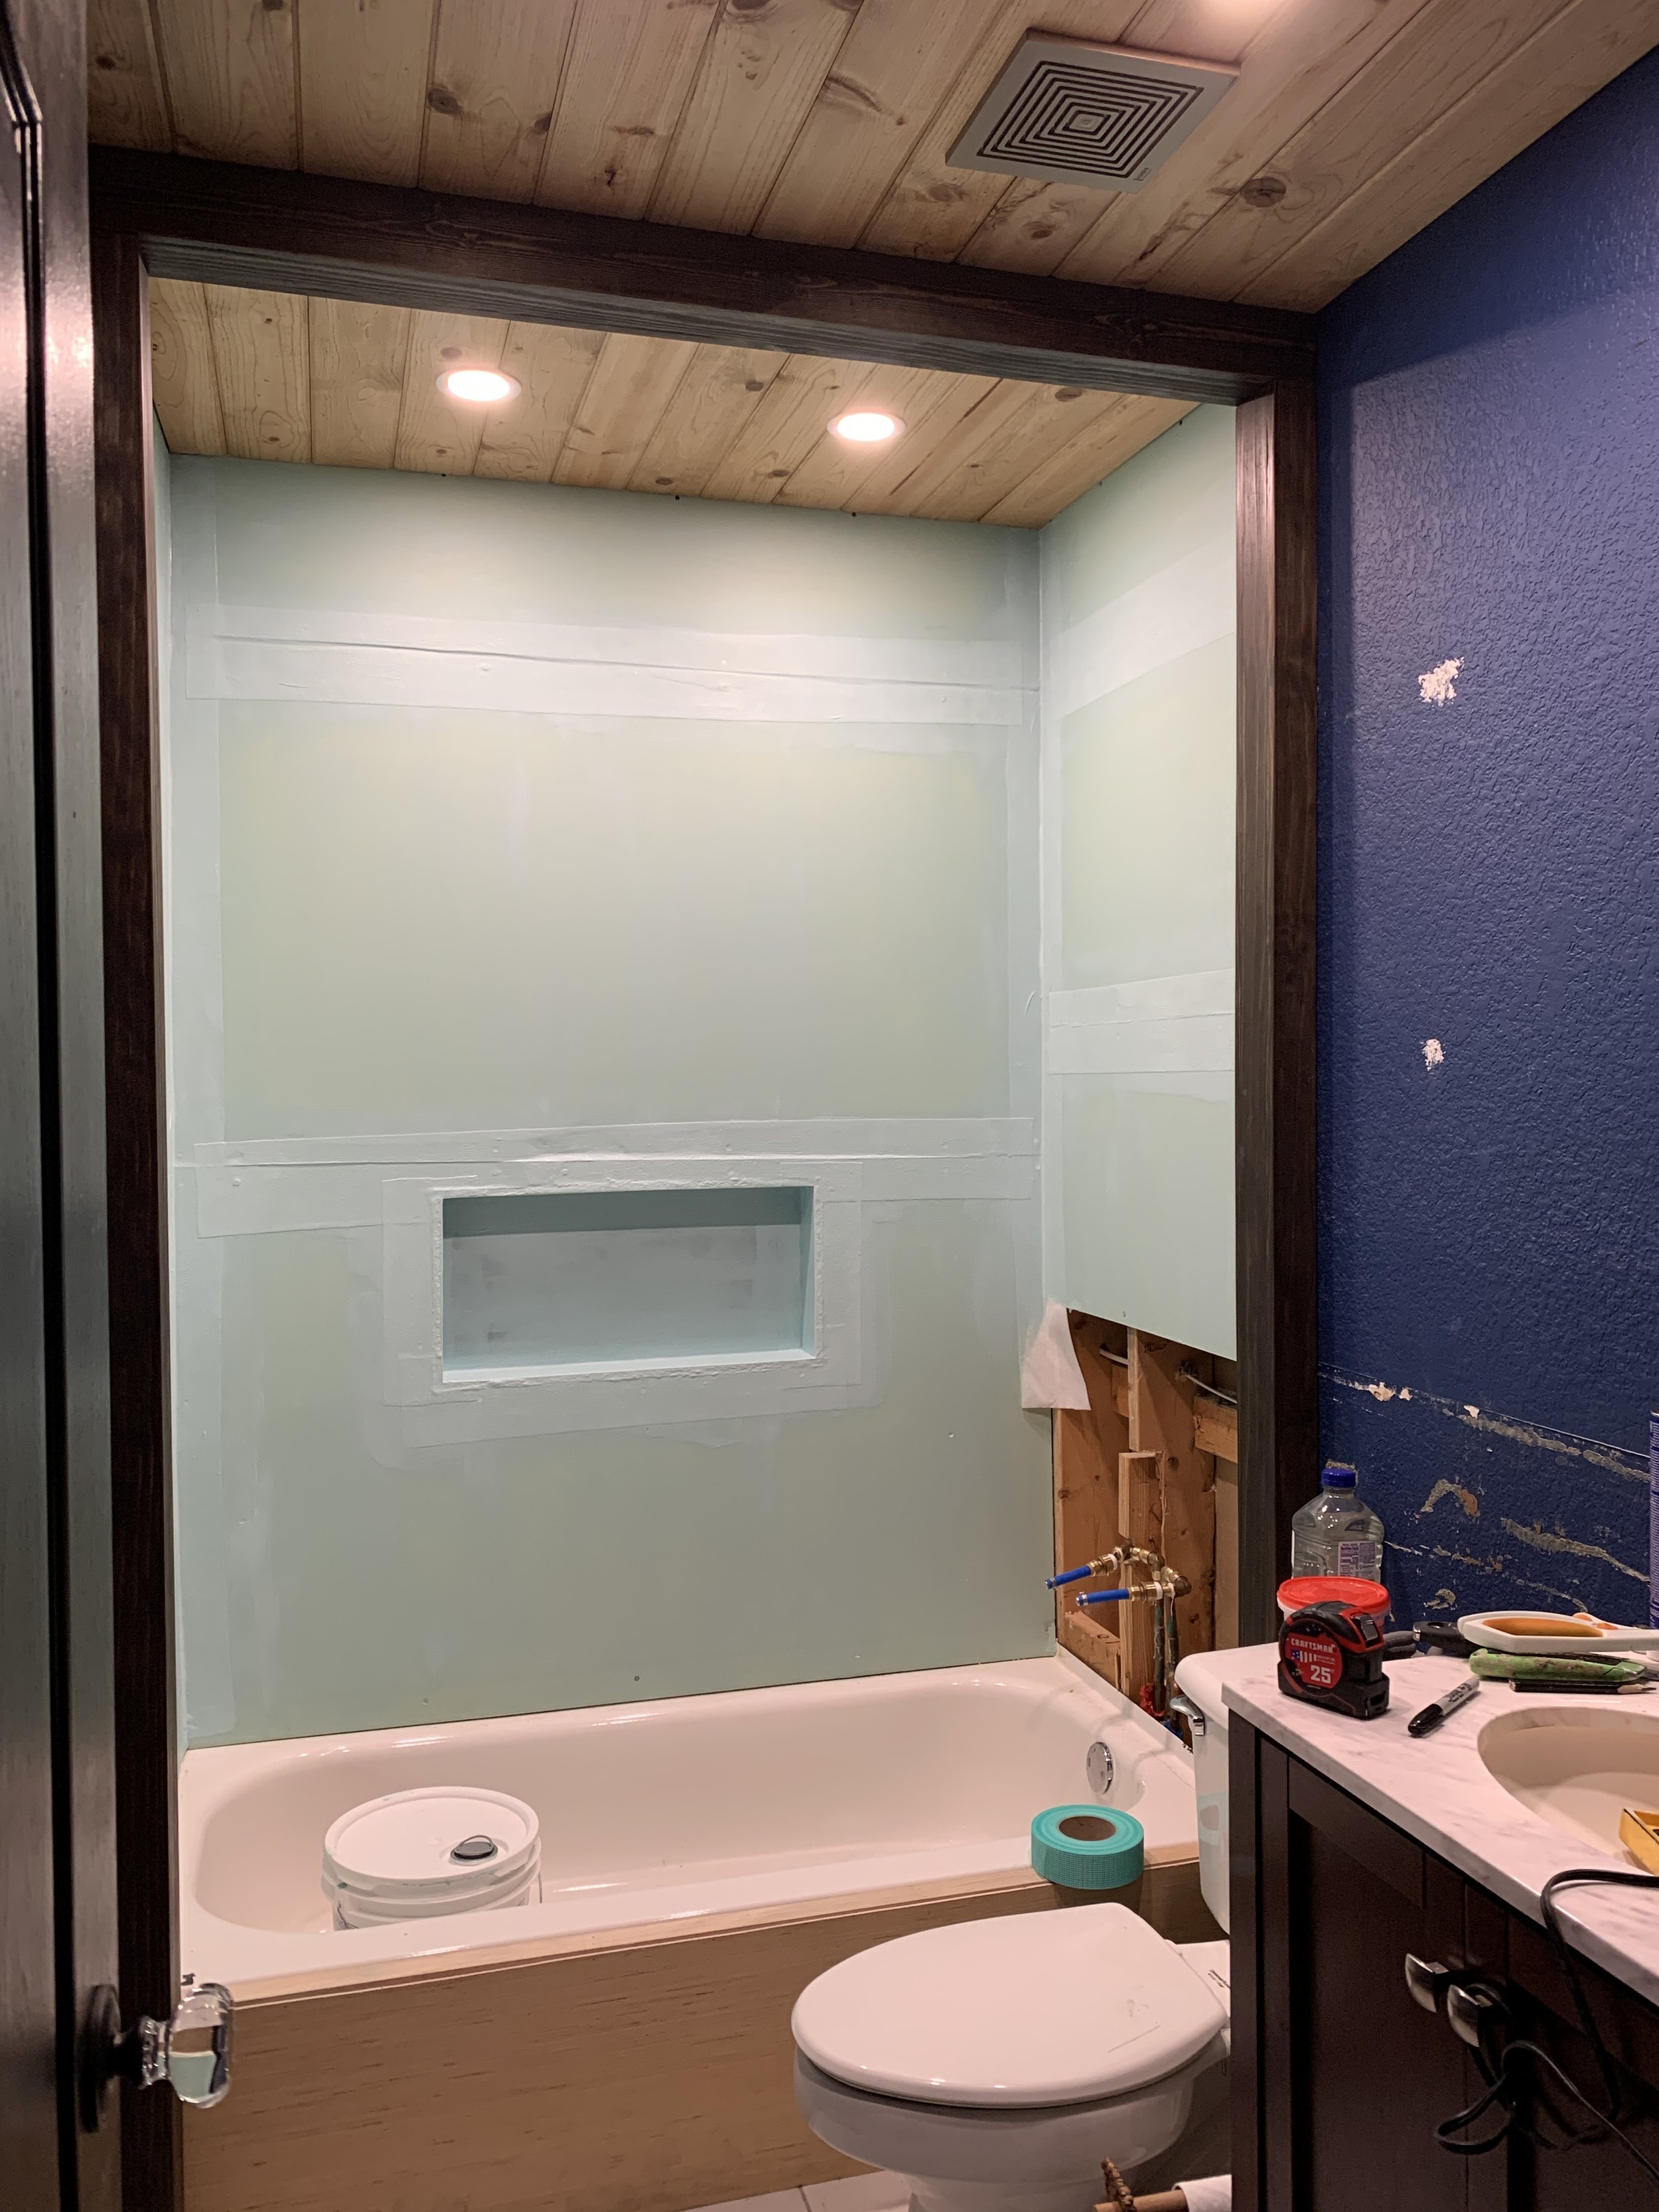 Building a Completely Custom Shower Niche from Scratch